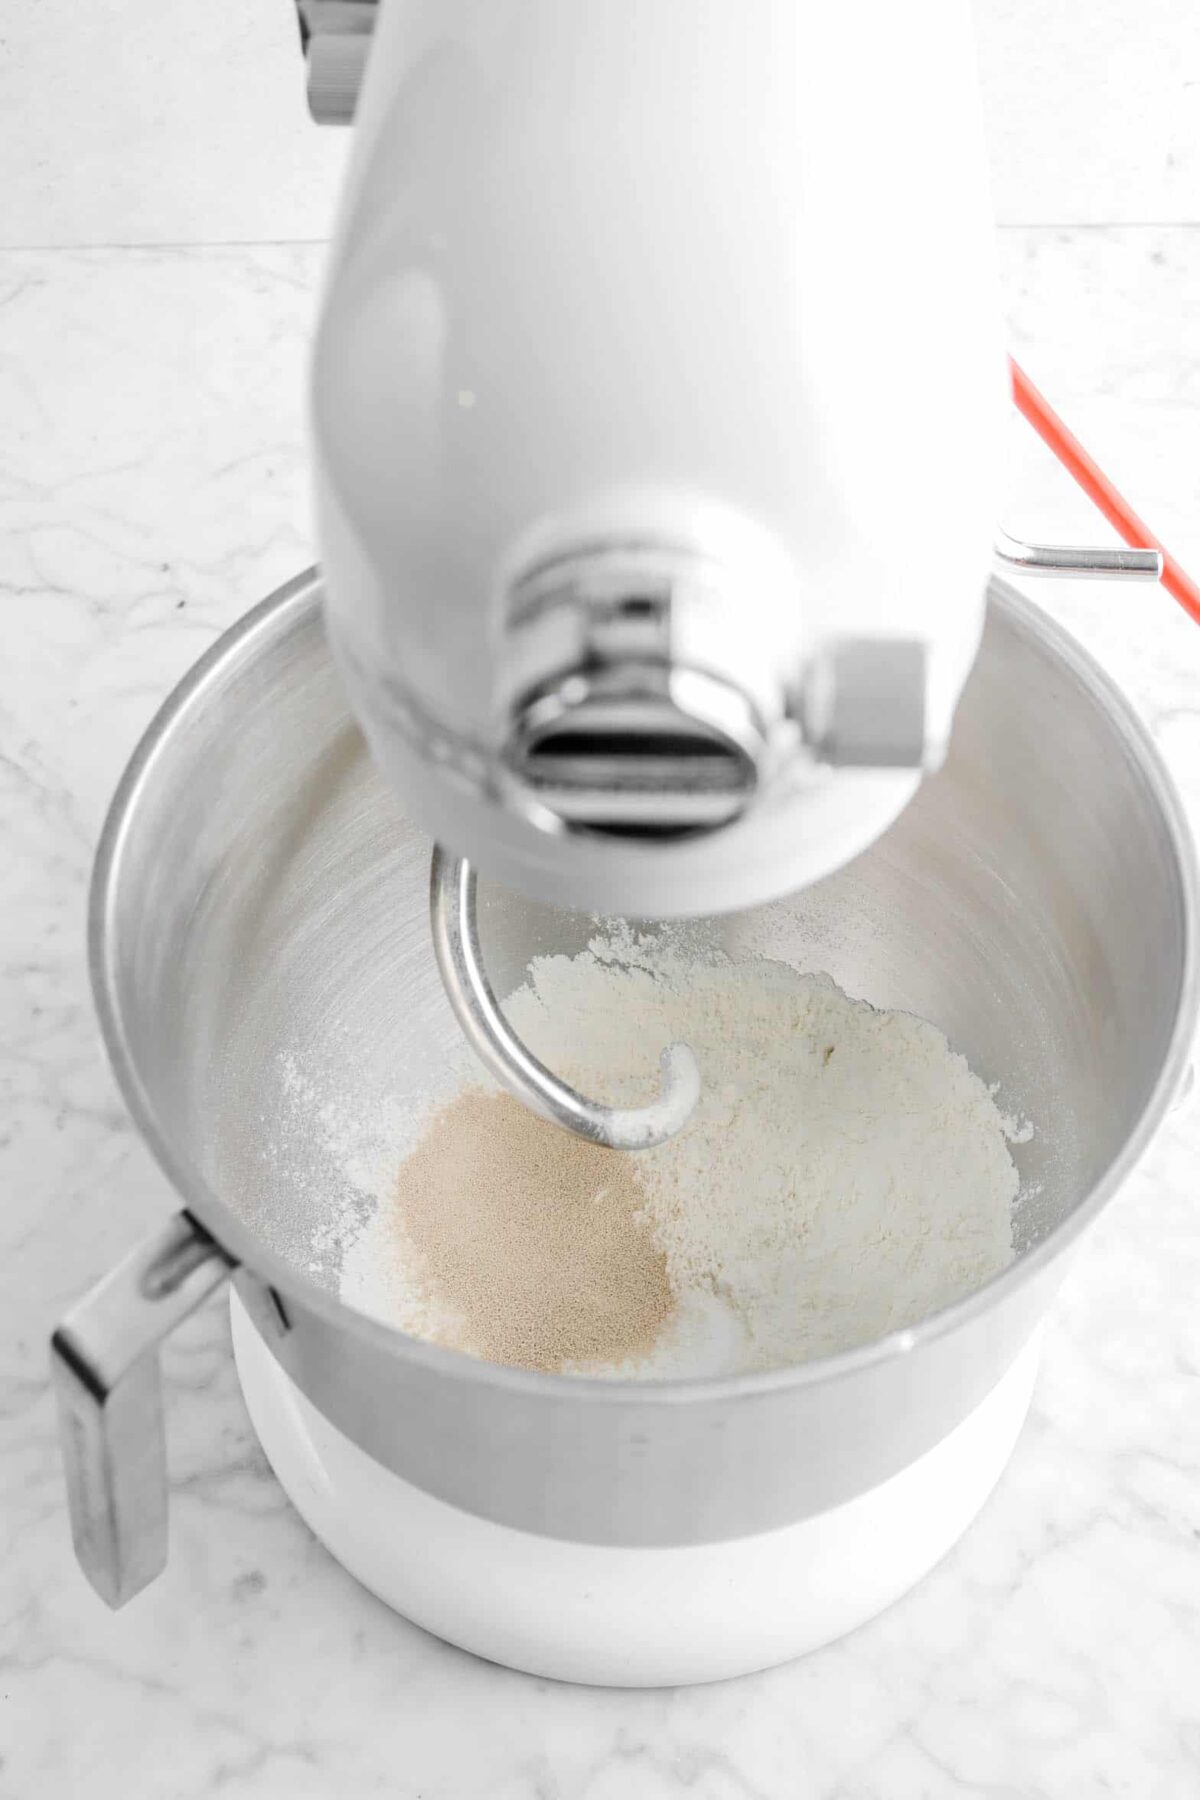 flour and yeast in a mixer bowl